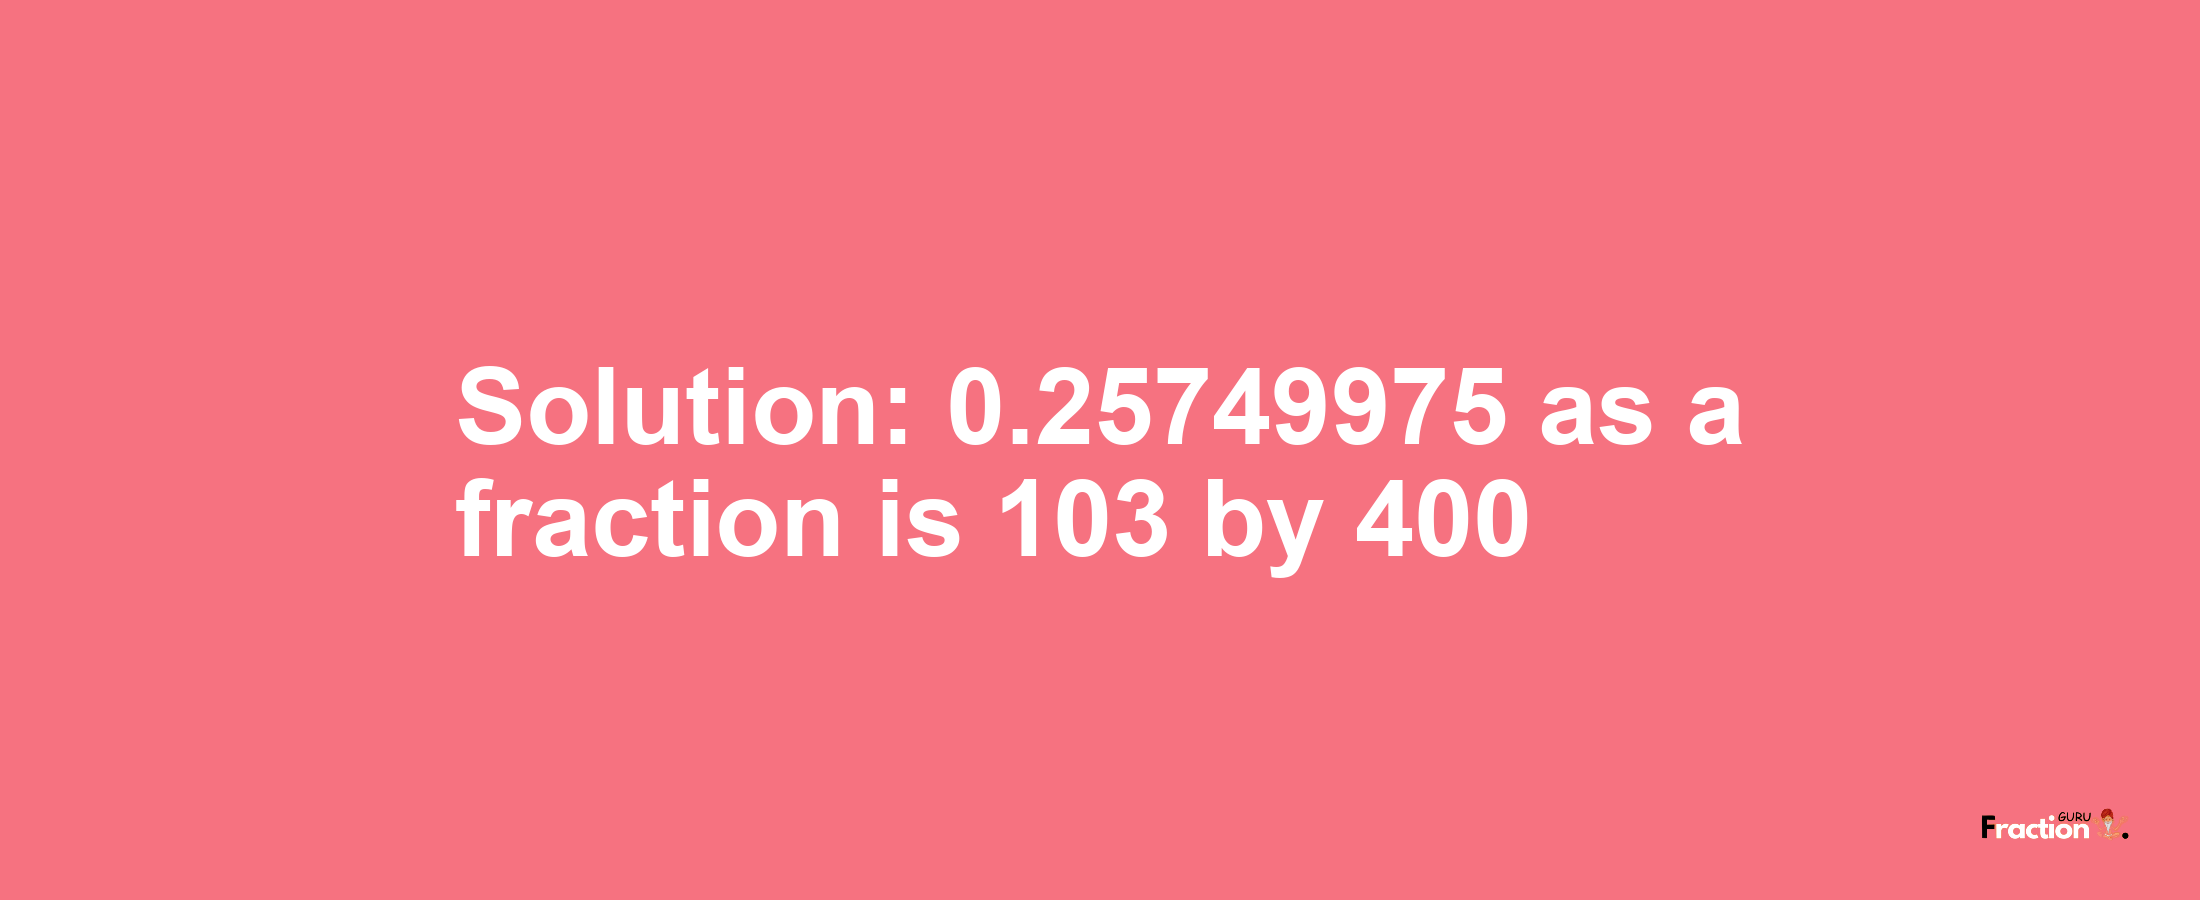 Solution:0.25749975 as a fraction is 103/400